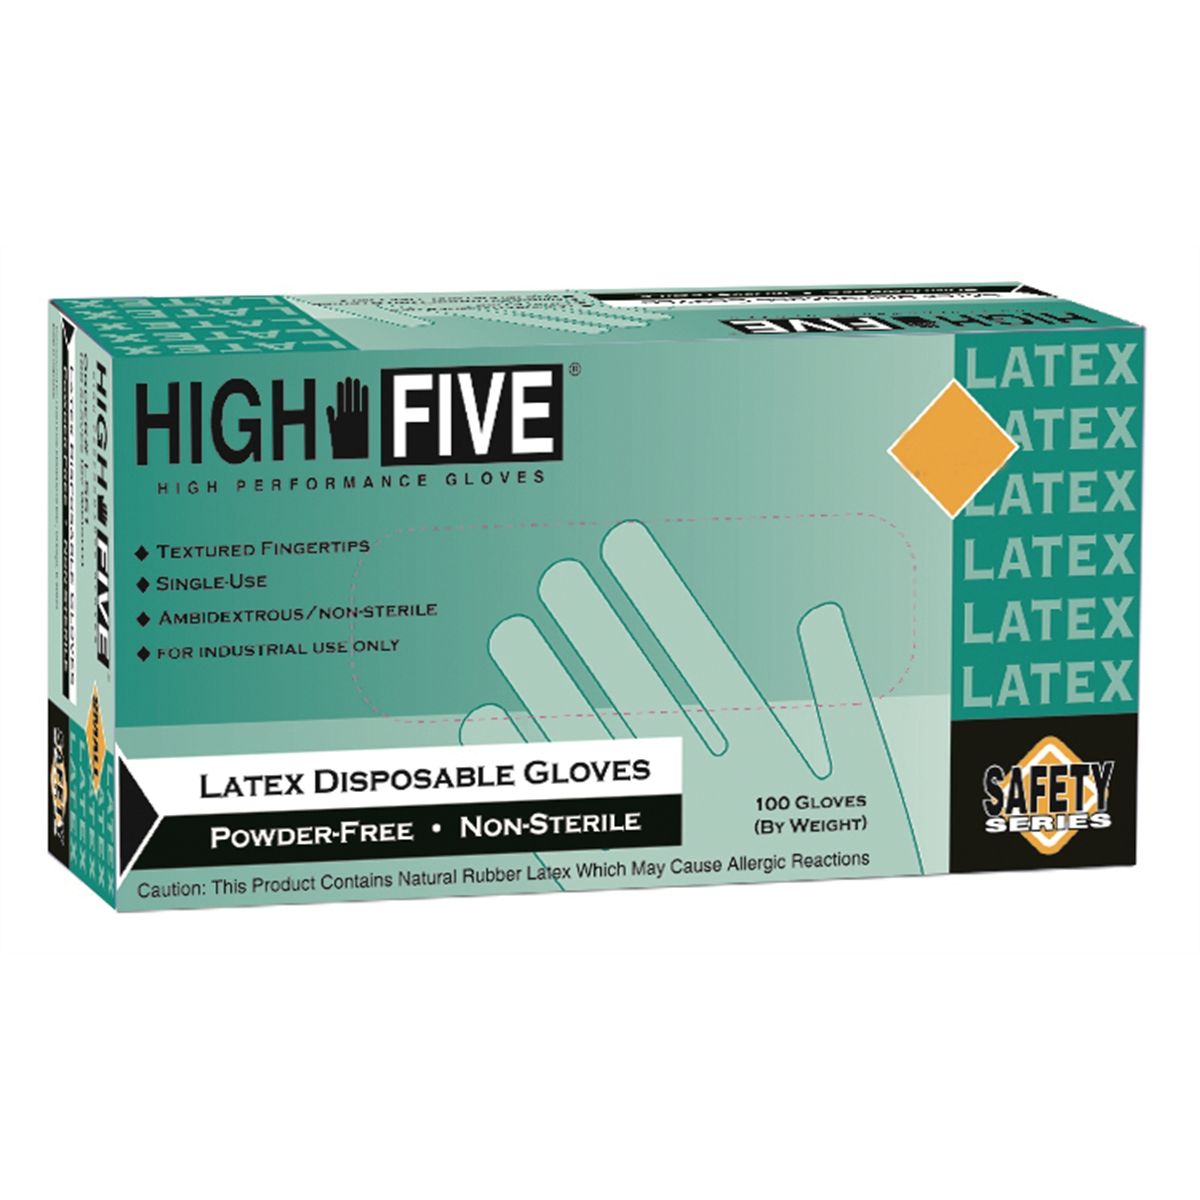 High Five Powder-Free Industrial Grade Latex Gloves - Small